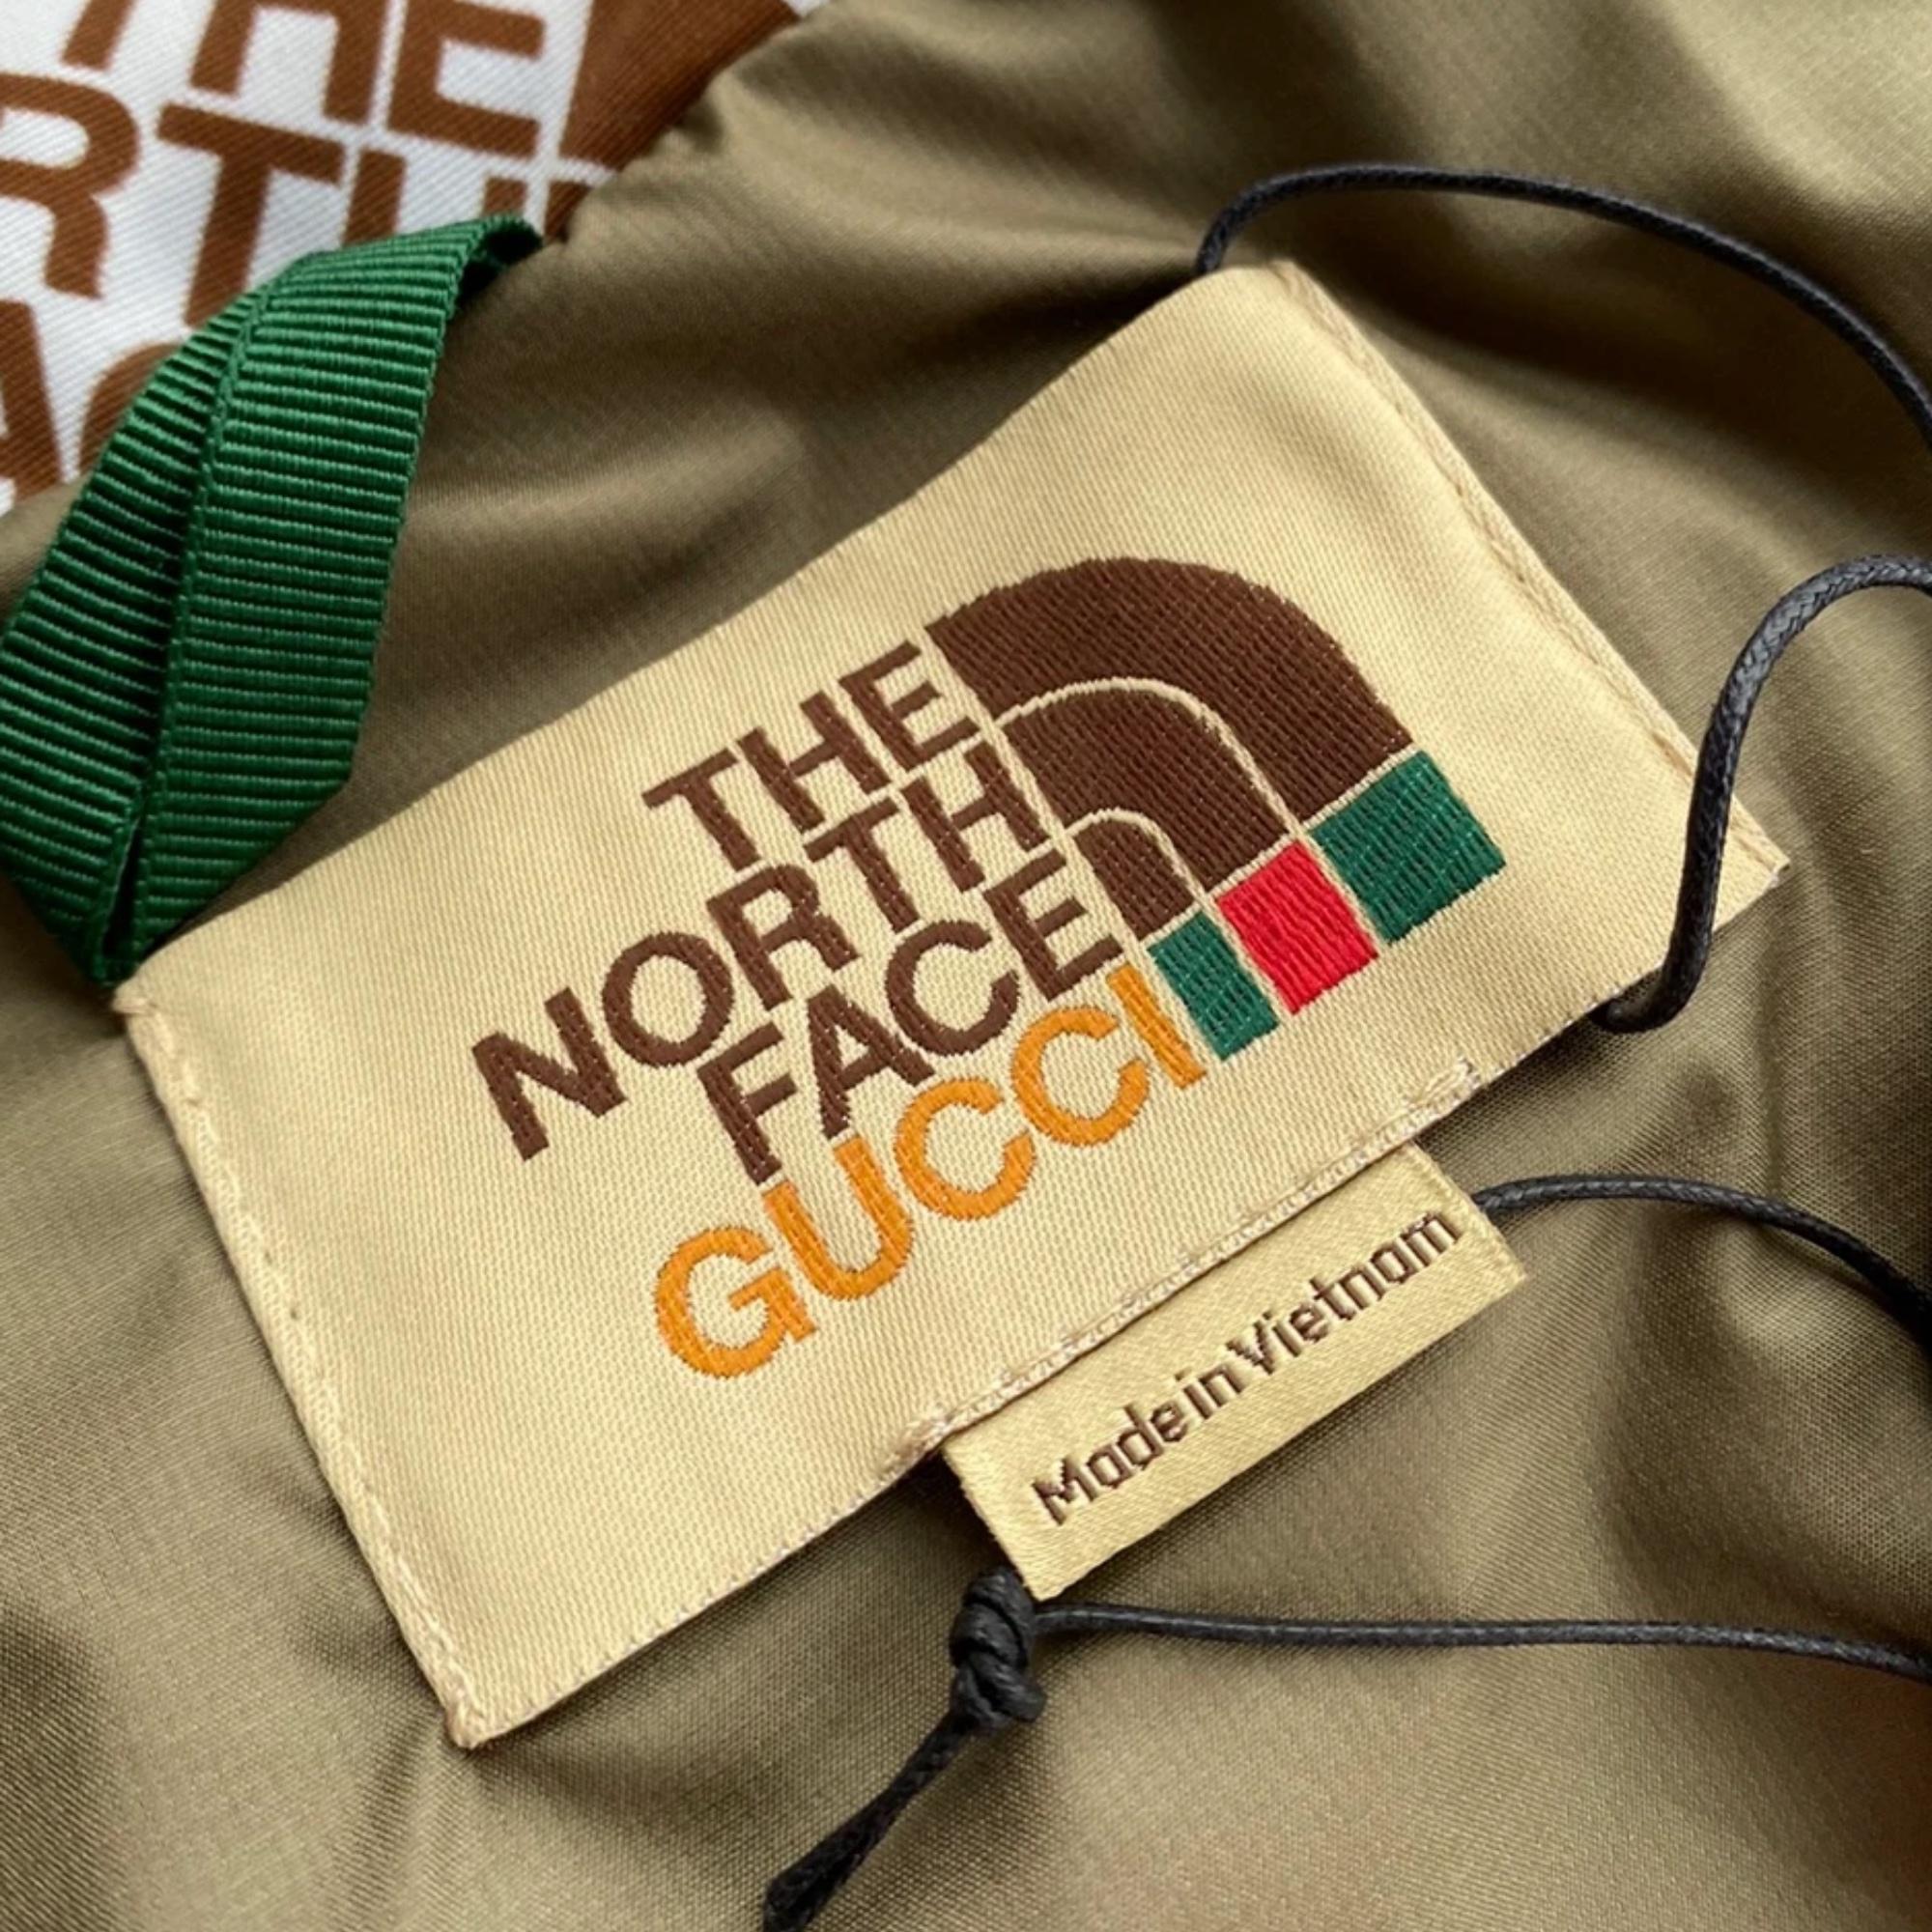 Gucci X The North Face Puffer Vest In New Condition For Sale In Montreal, Quebec